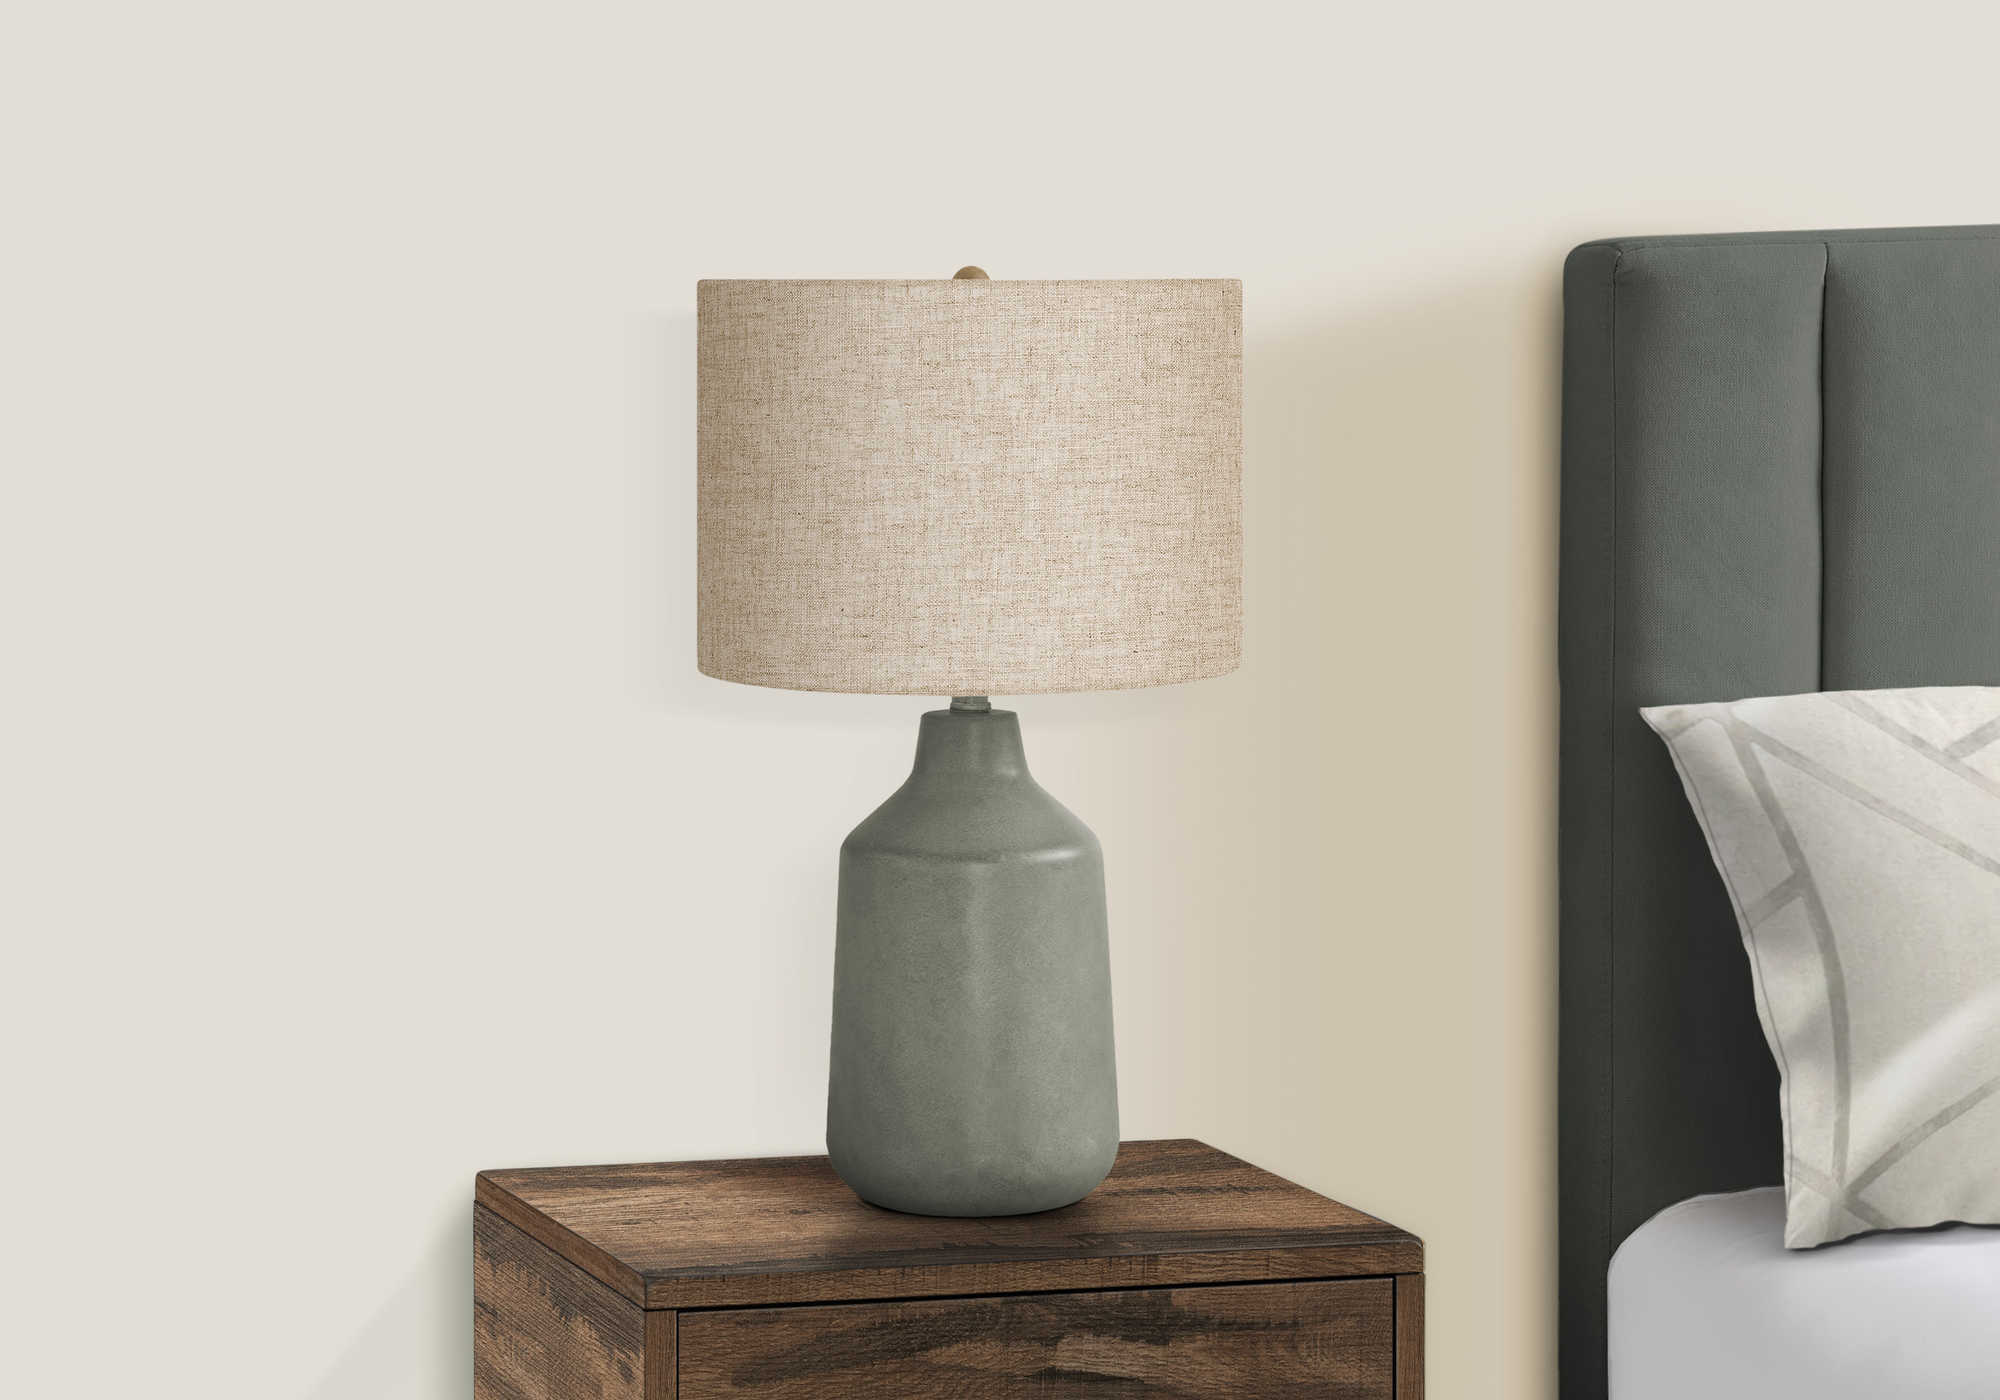 LIGHTING - 24"H TABLE LAMP GREY CONCRETE / BEIGE SHADE